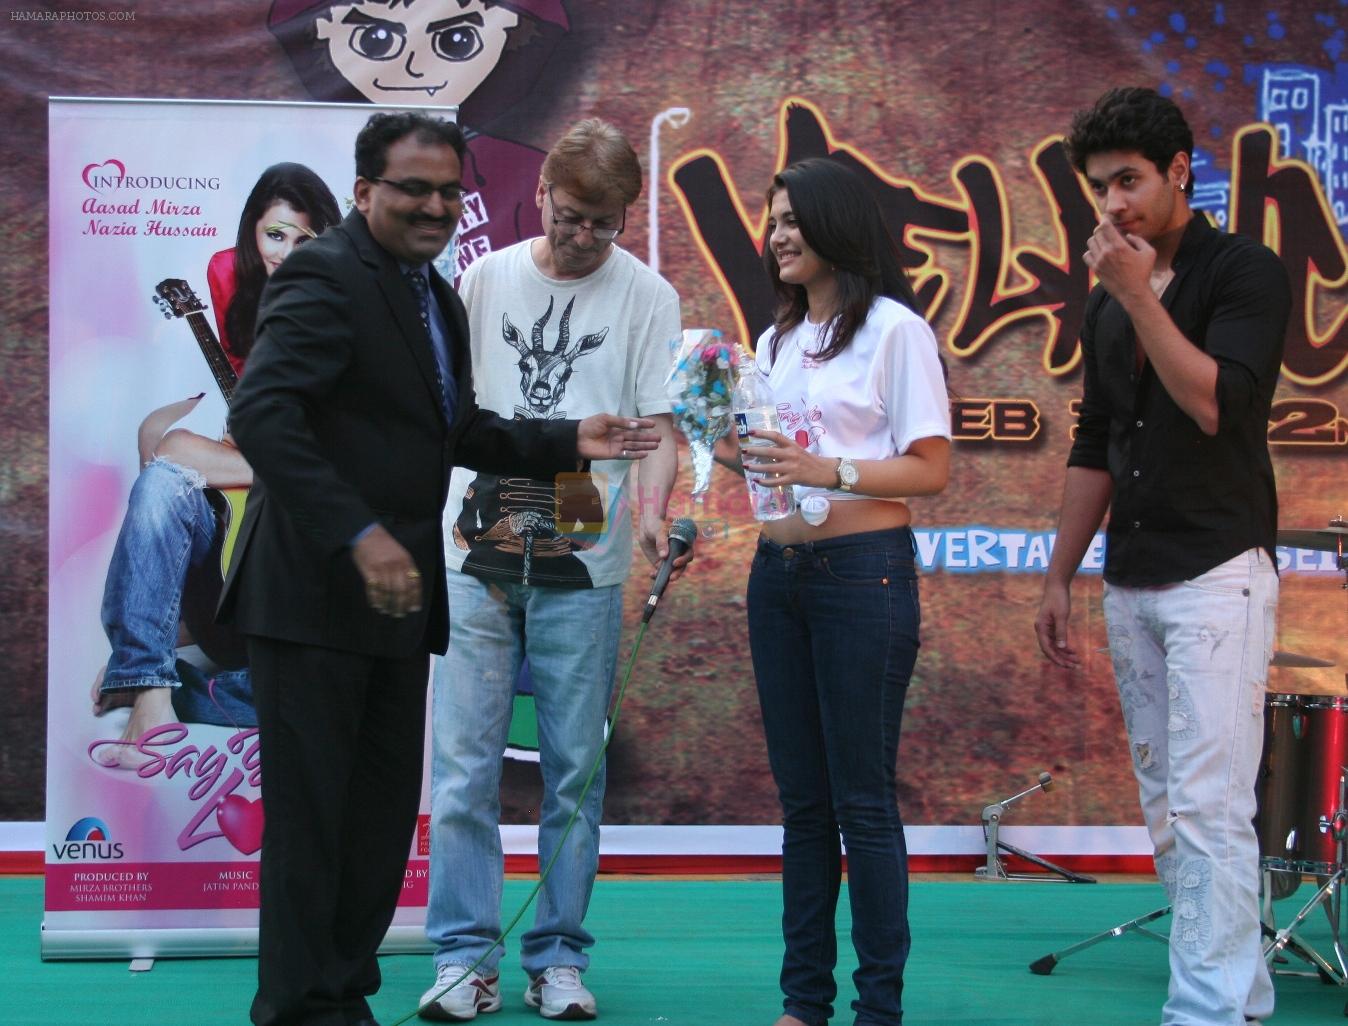 DY.Patil Profeesor and Marukh Mirza,Nazia Hussain,Assad Mirza at the Promotion of the Film Say Yes to Love at Dr.D.Y.Patil College's Velawcity Fest 2012